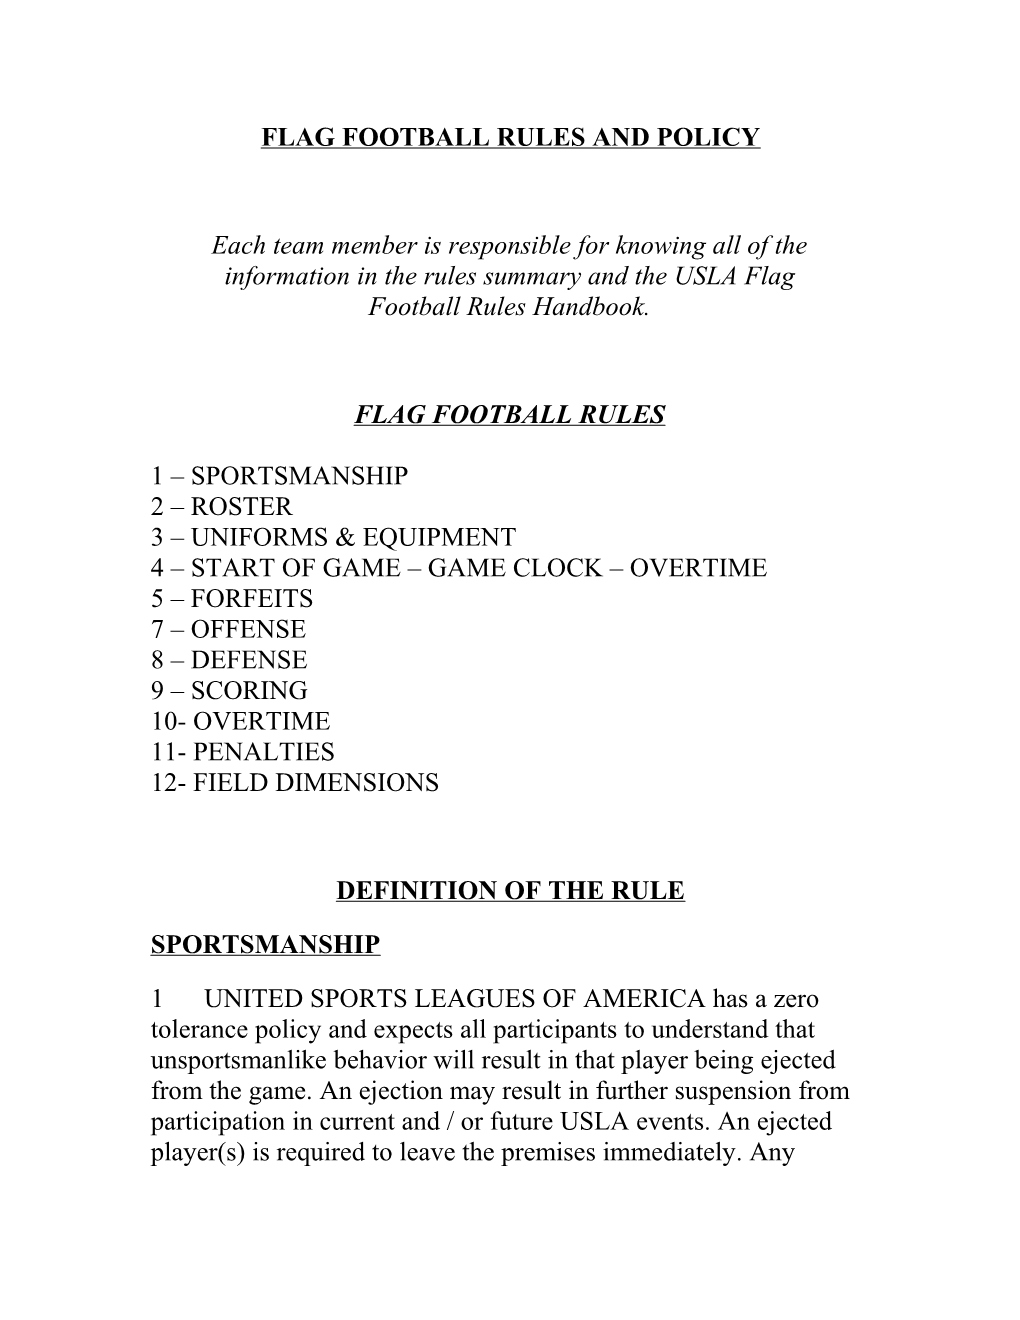 Flag Football Rules and Policy